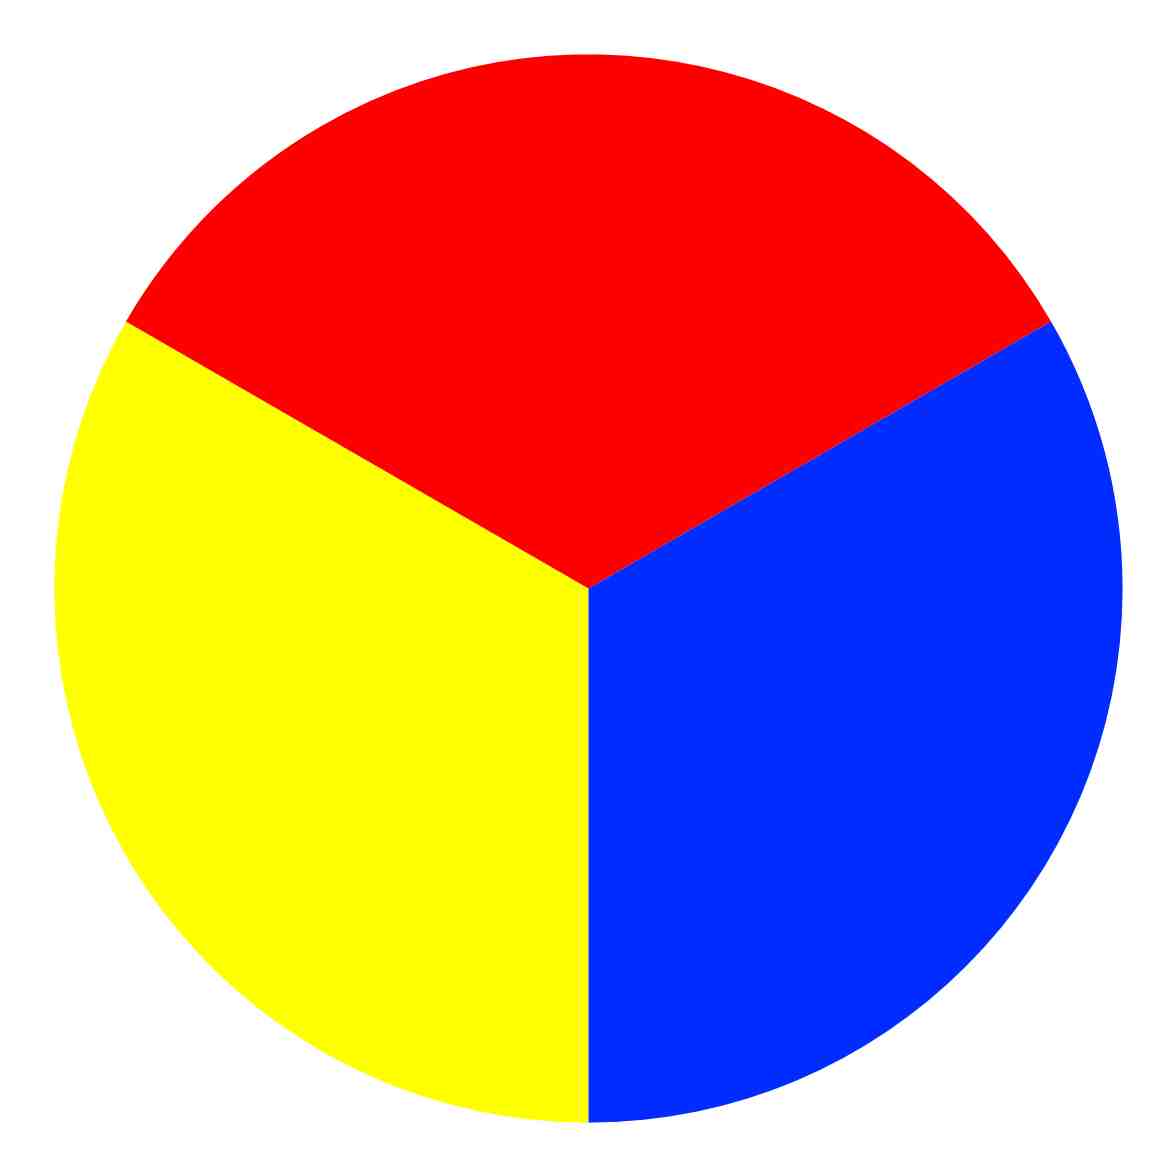 Primary colors on color wheel - honniche